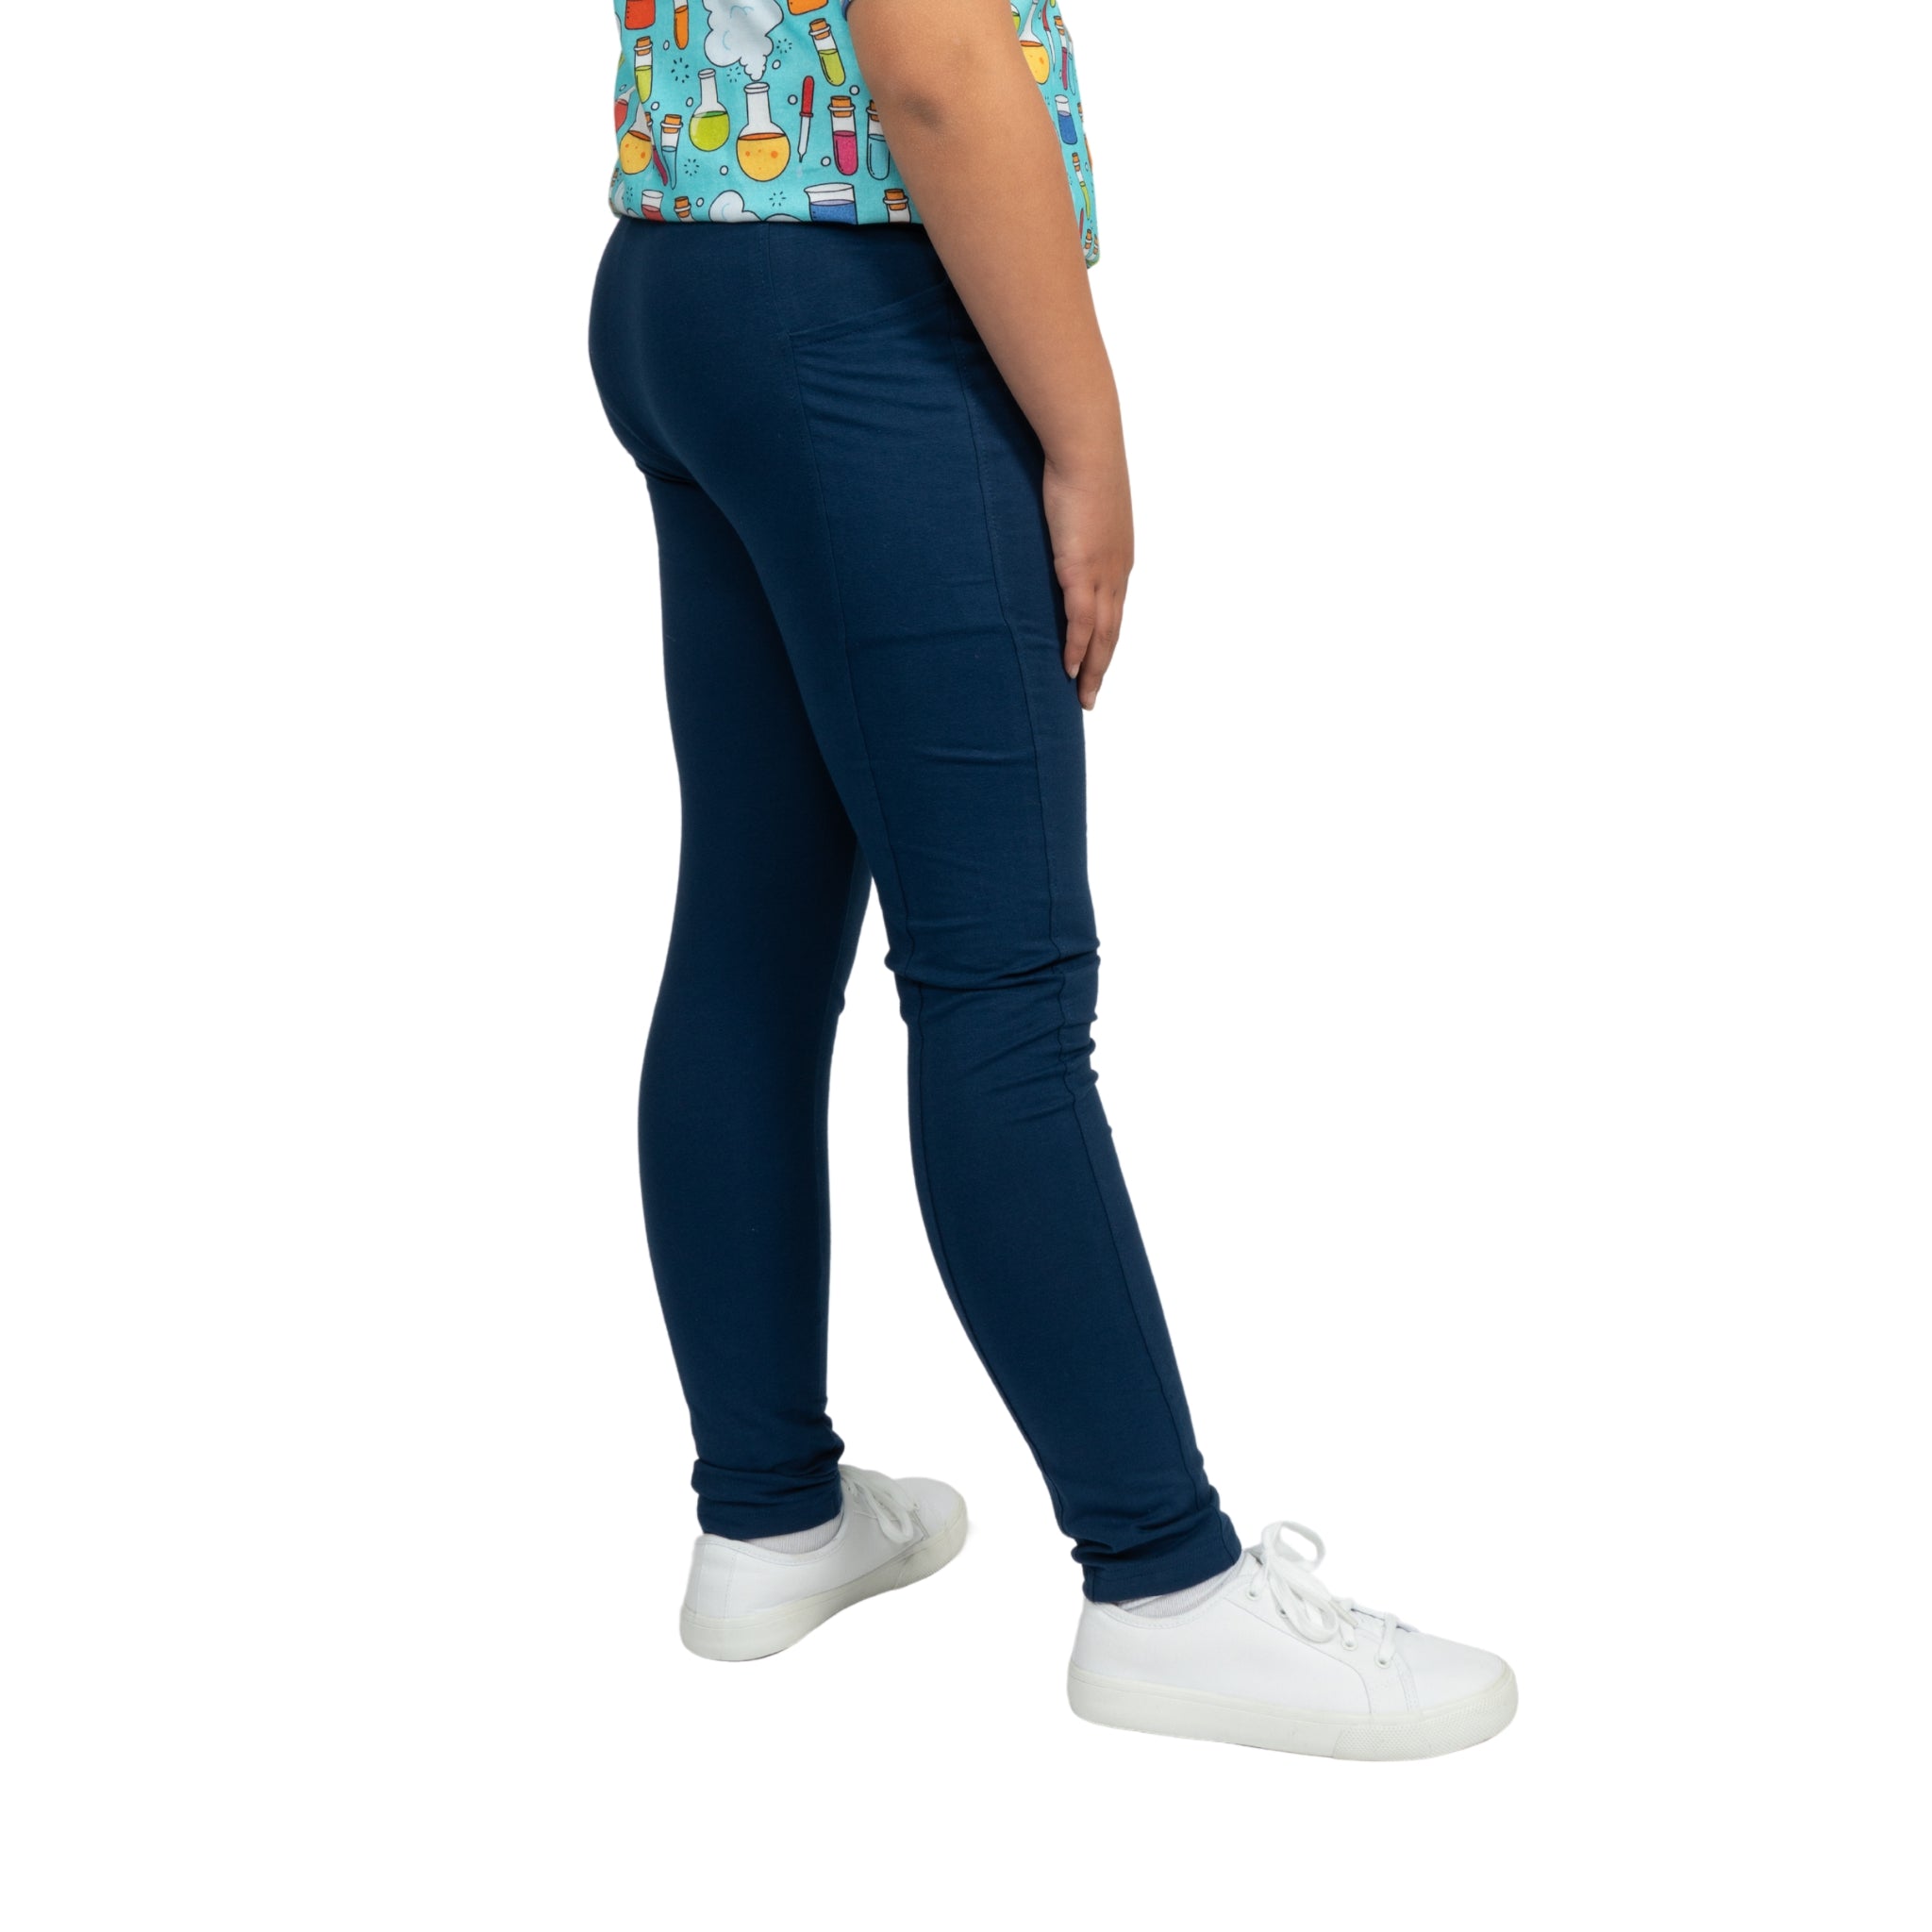 Navy Blue Kids Leggings with Pockets